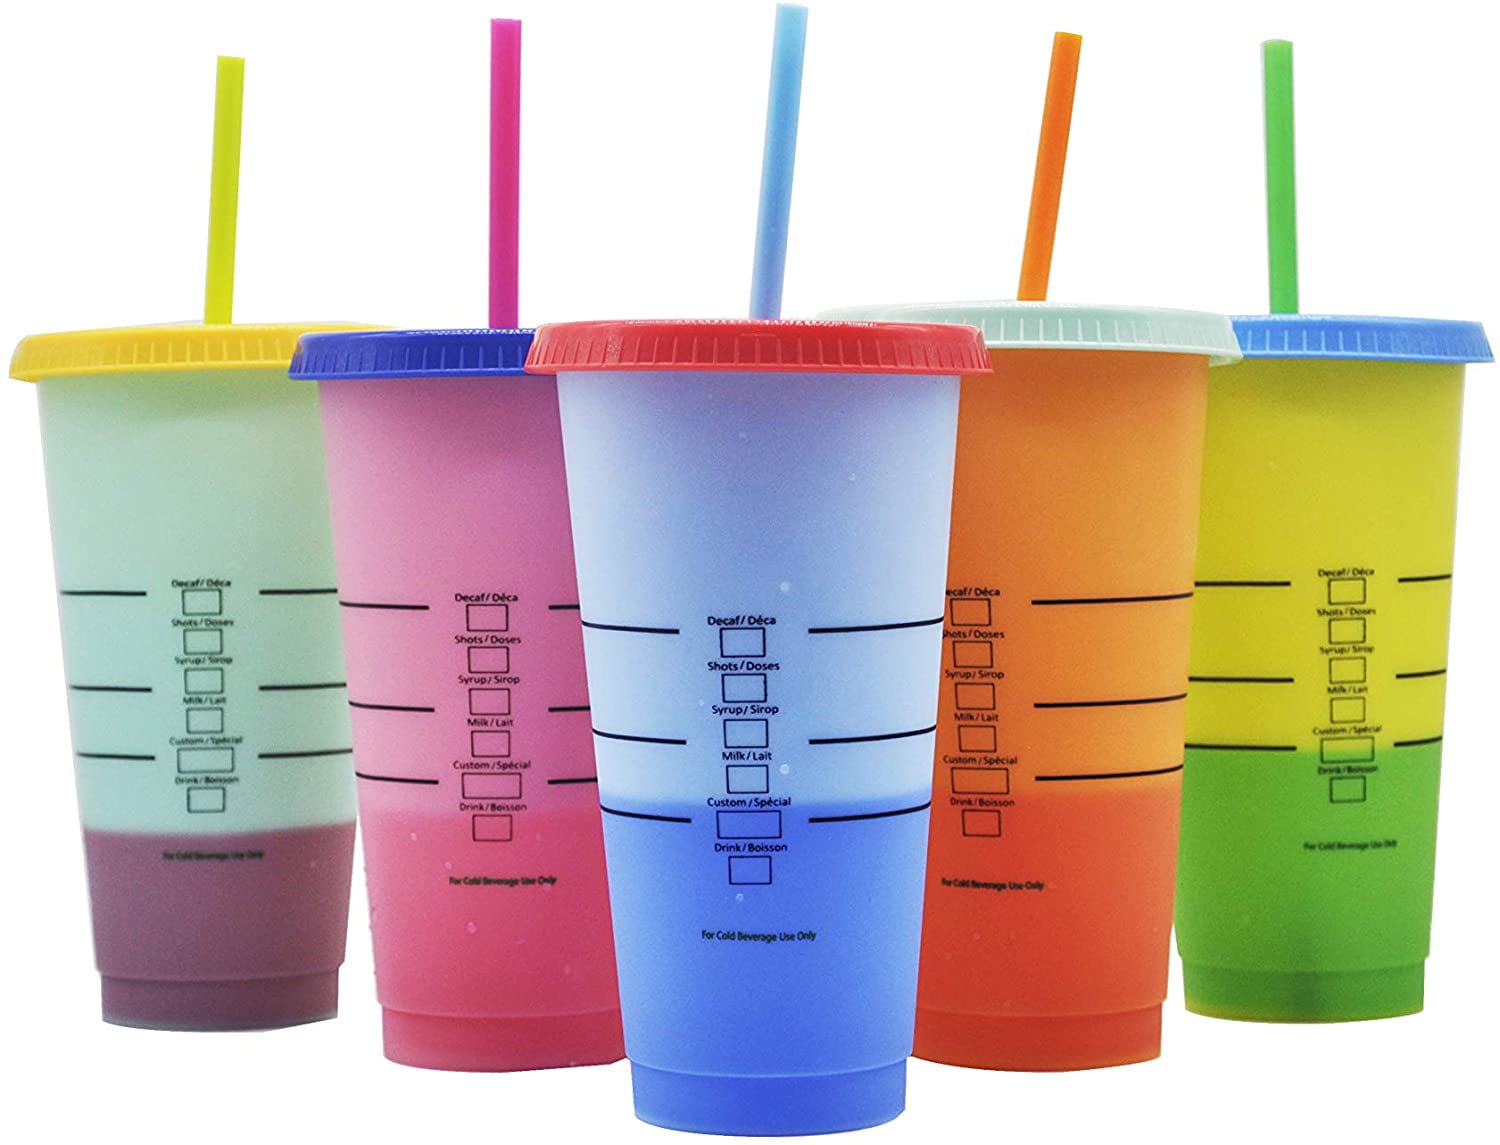 New!! Ello 10pk Color Changing Tumblers Straws Included. Blue Colors!!